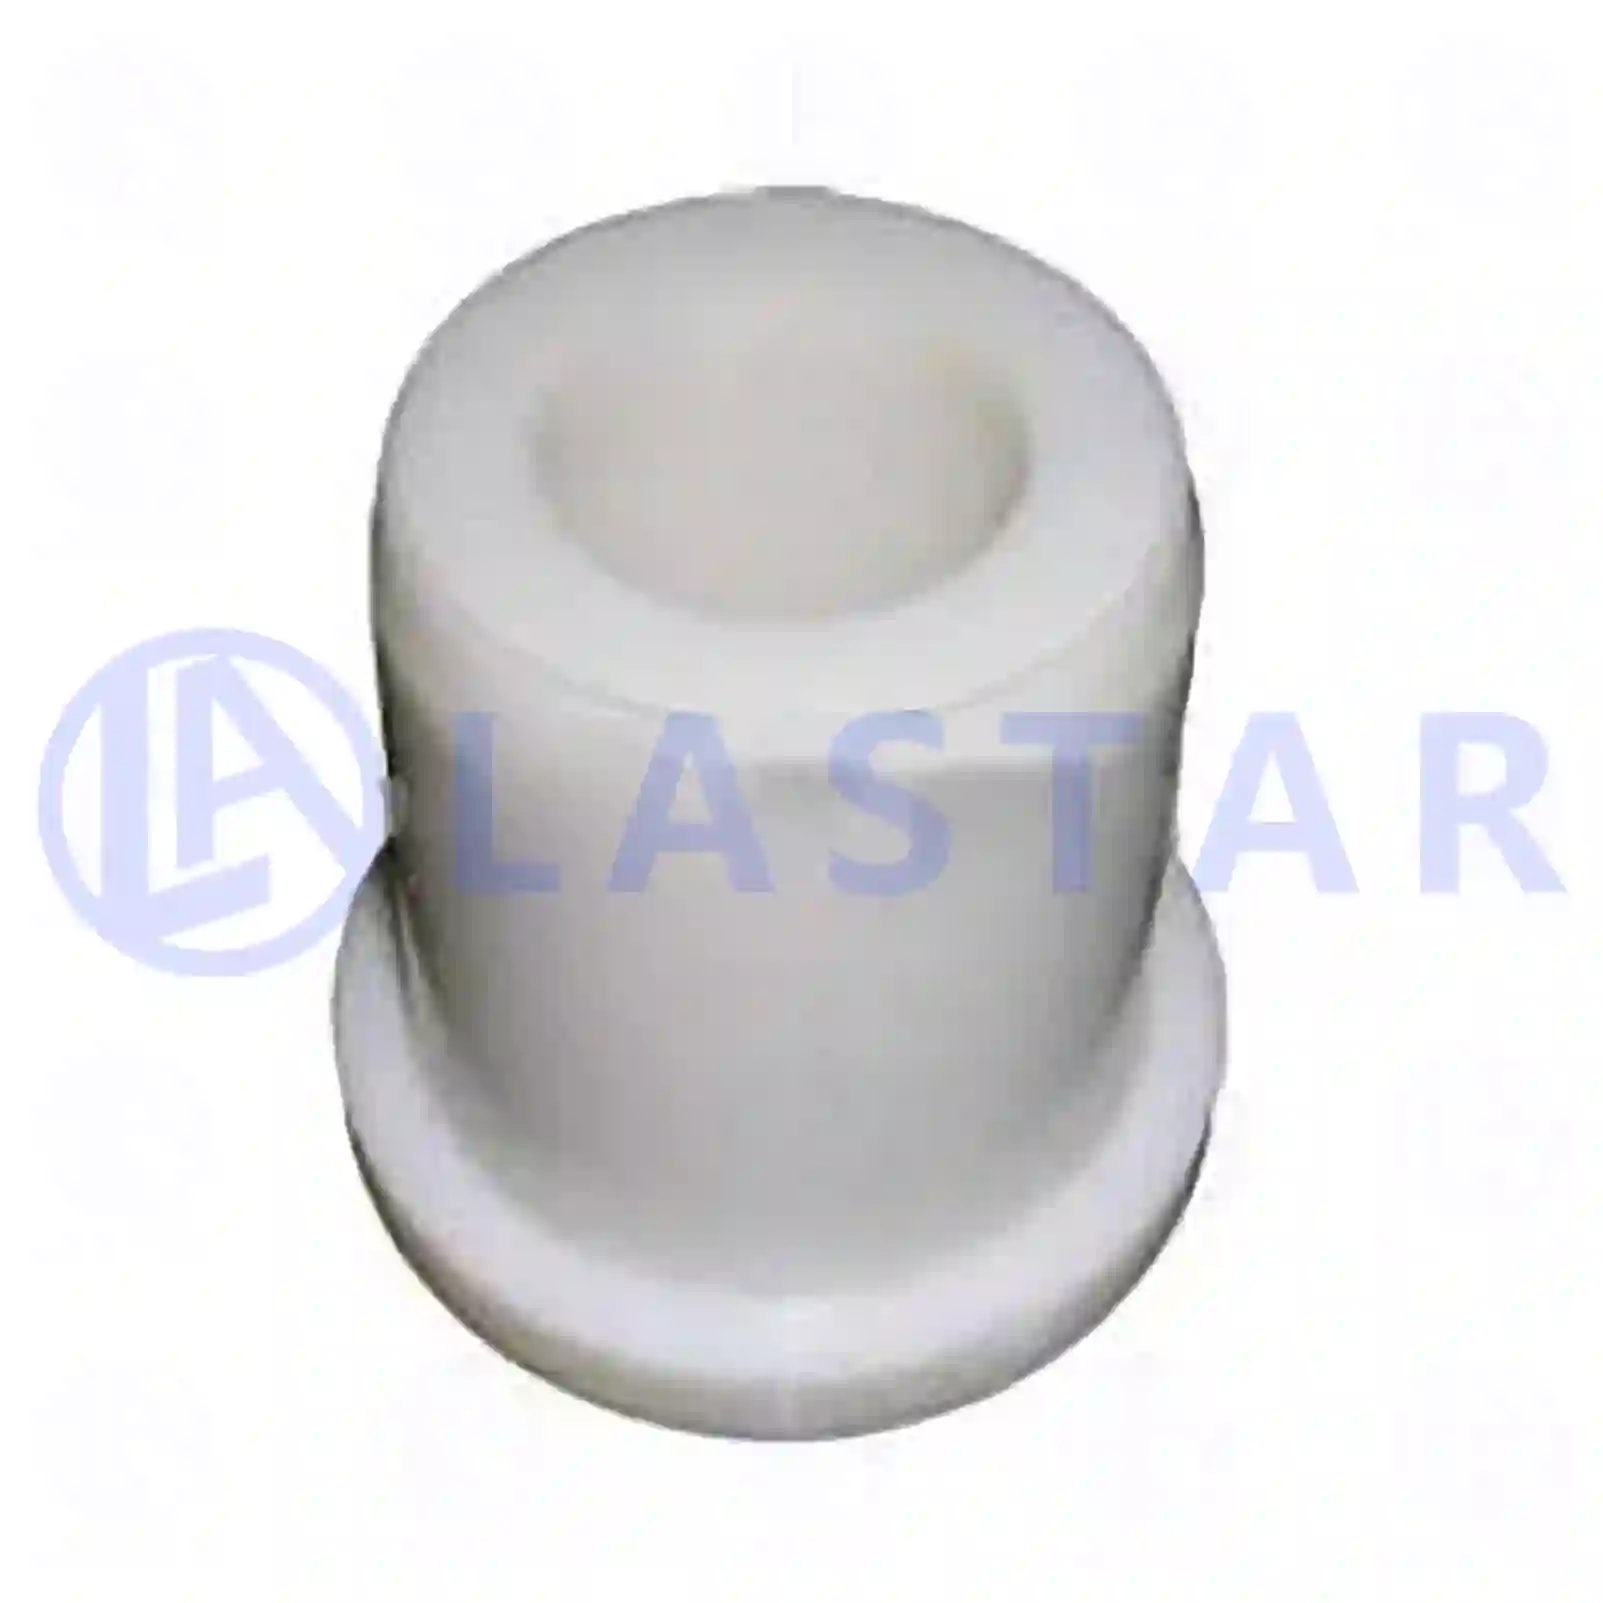 Bushing, stabilizer, 77728600, 0259526, 0299108, 259526, 299108 ||  77728600 Lastar Spare Part | Truck Spare Parts, Auotomotive Spare Parts Bushing, stabilizer, 77728600, 0259526, 0299108, 259526, 299108 ||  77728600 Lastar Spare Part | Truck Spare Parts, Auotomotive Spare Parts